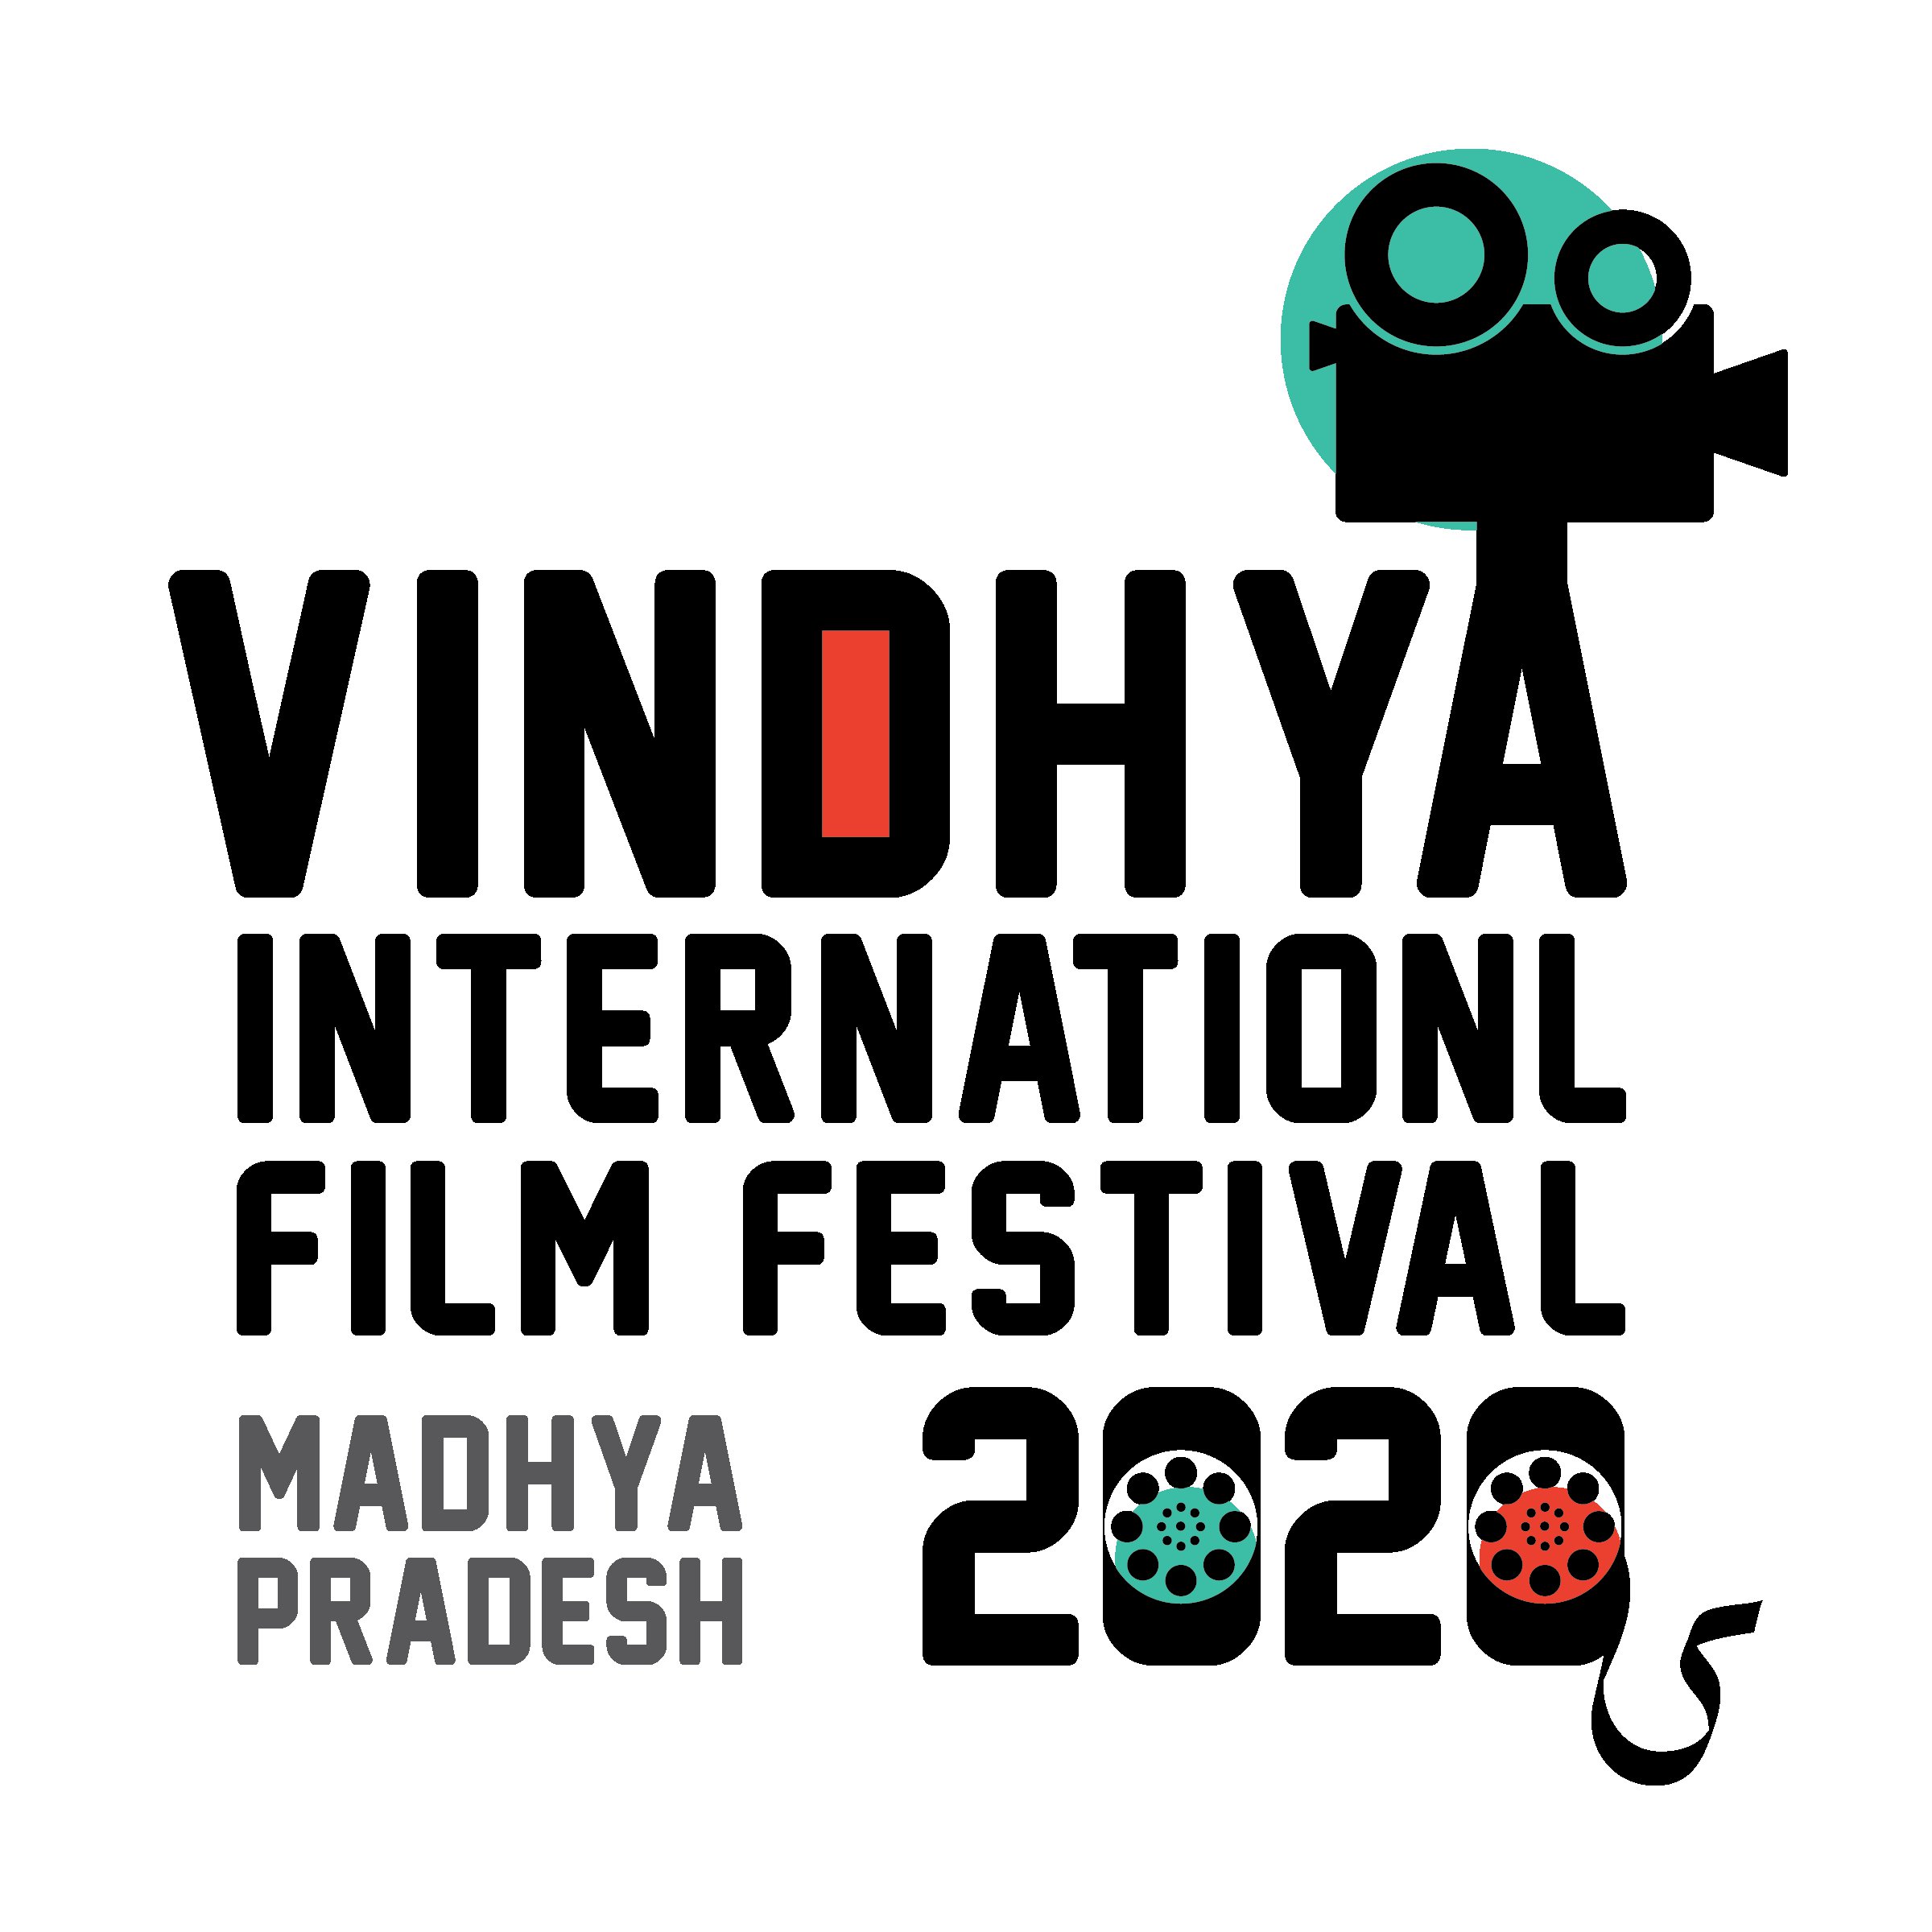 12 Cool Film Festivals In India Every Cinema Lover Should Attend